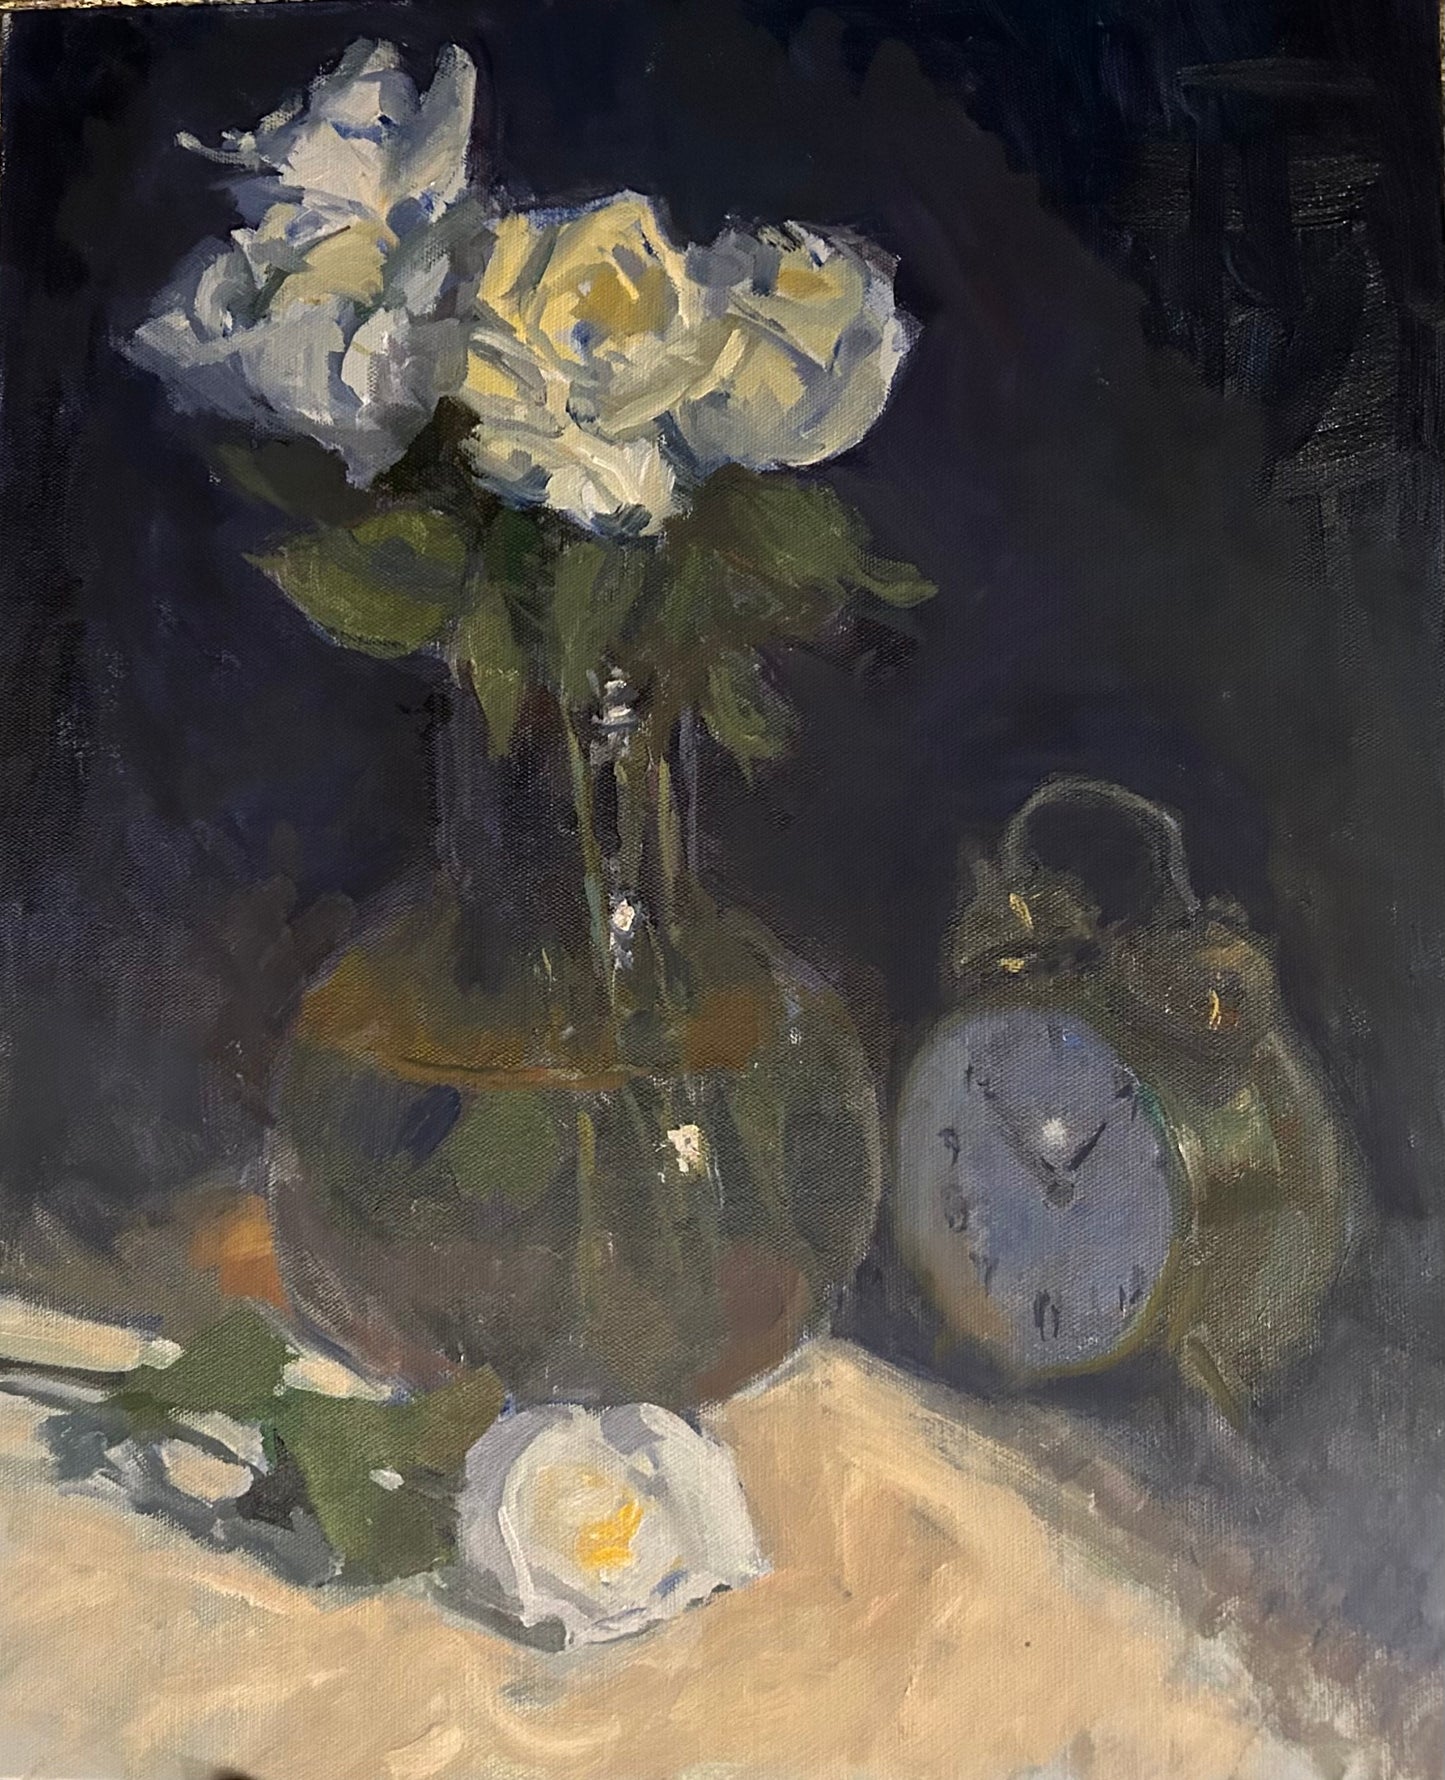 White Roses and Clock (20 x 16 Inches)